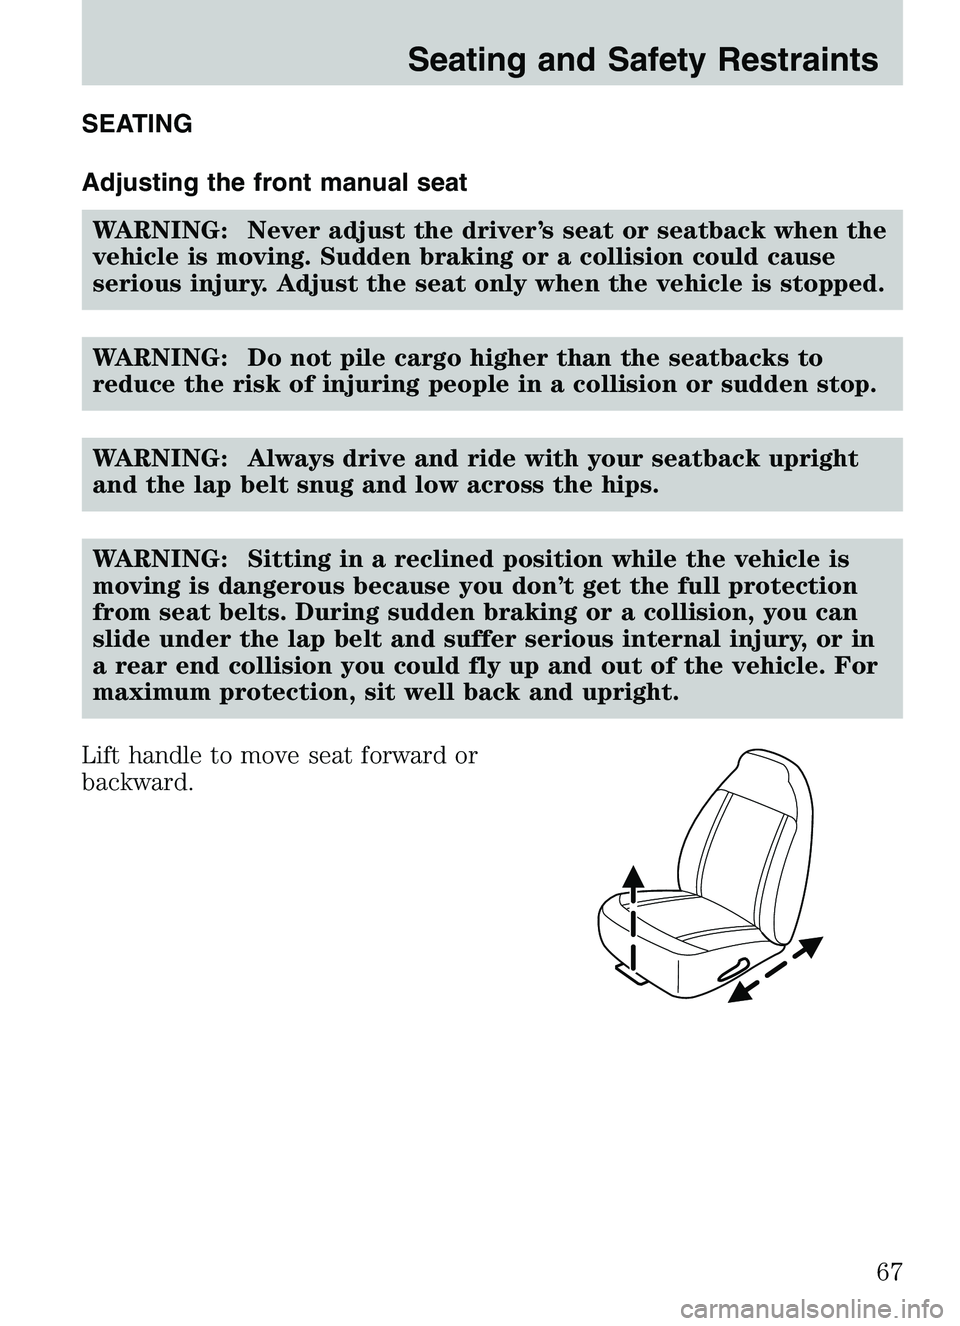 MAZDA MODEL B4000 4WD 2003  Owners Manual SEATING
Adjusting the front manual seatWARNING: Never adjust the driver’s seat or seatback when the
vehicle is moving. Sudden braking or a collision could cause
serious injury. Adjust the seat only 